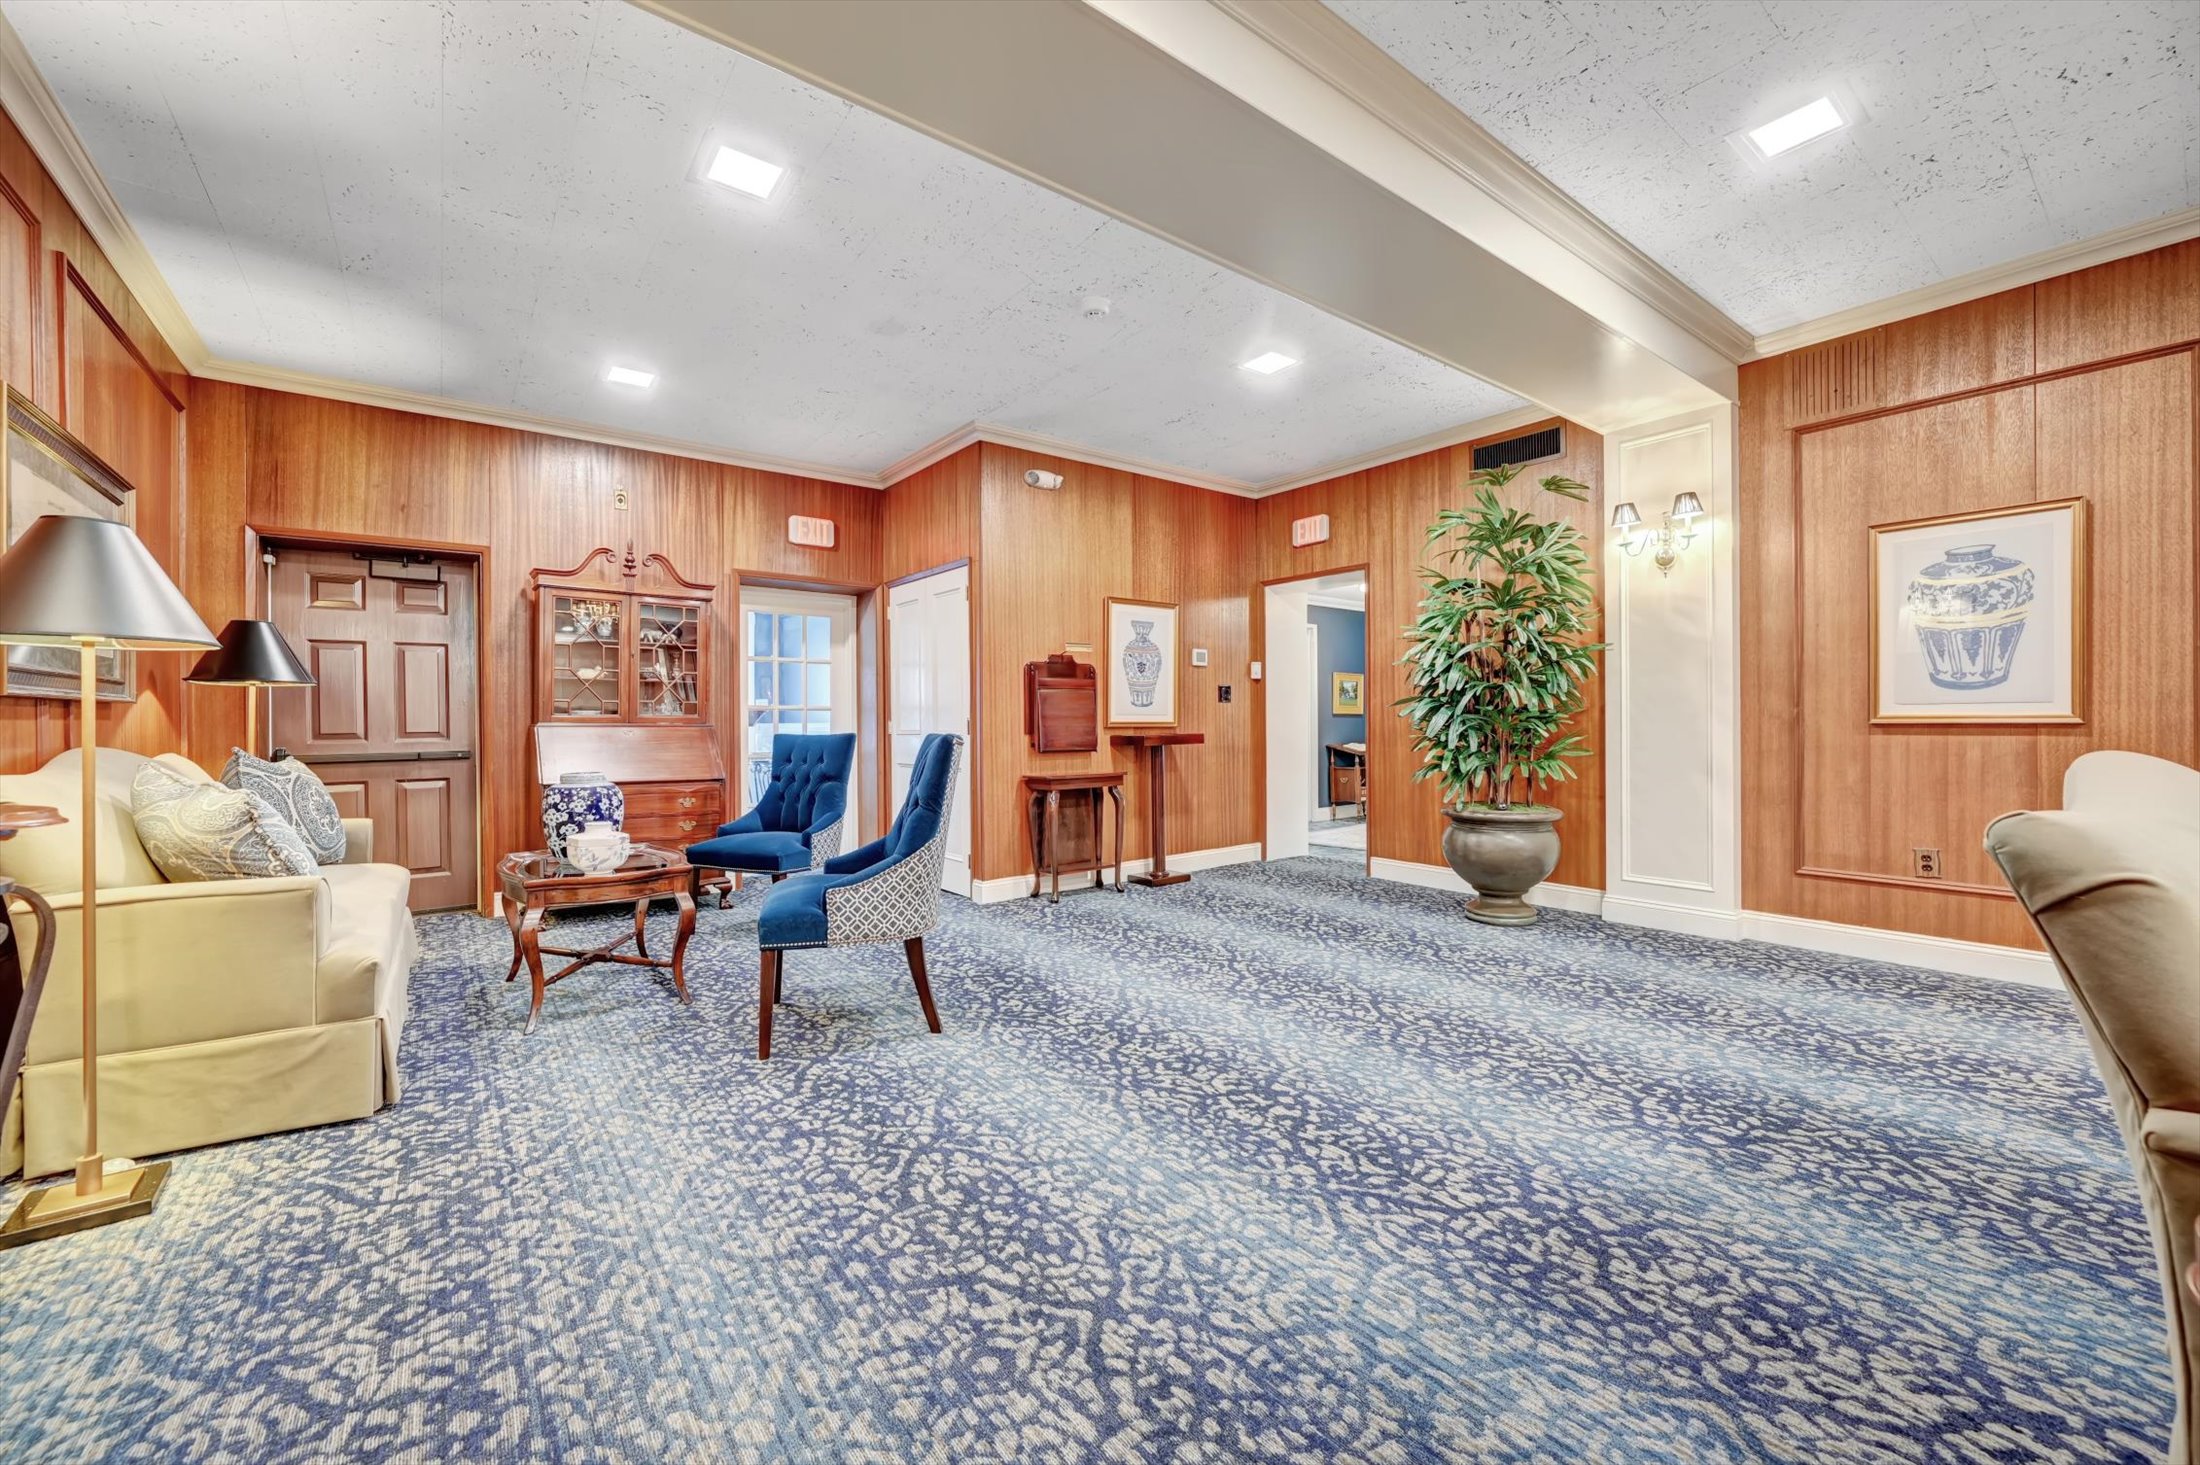 Interior of
Woolley-Boglioli Funeral Home
10 Morrell St
Long Branch, NJ 07740